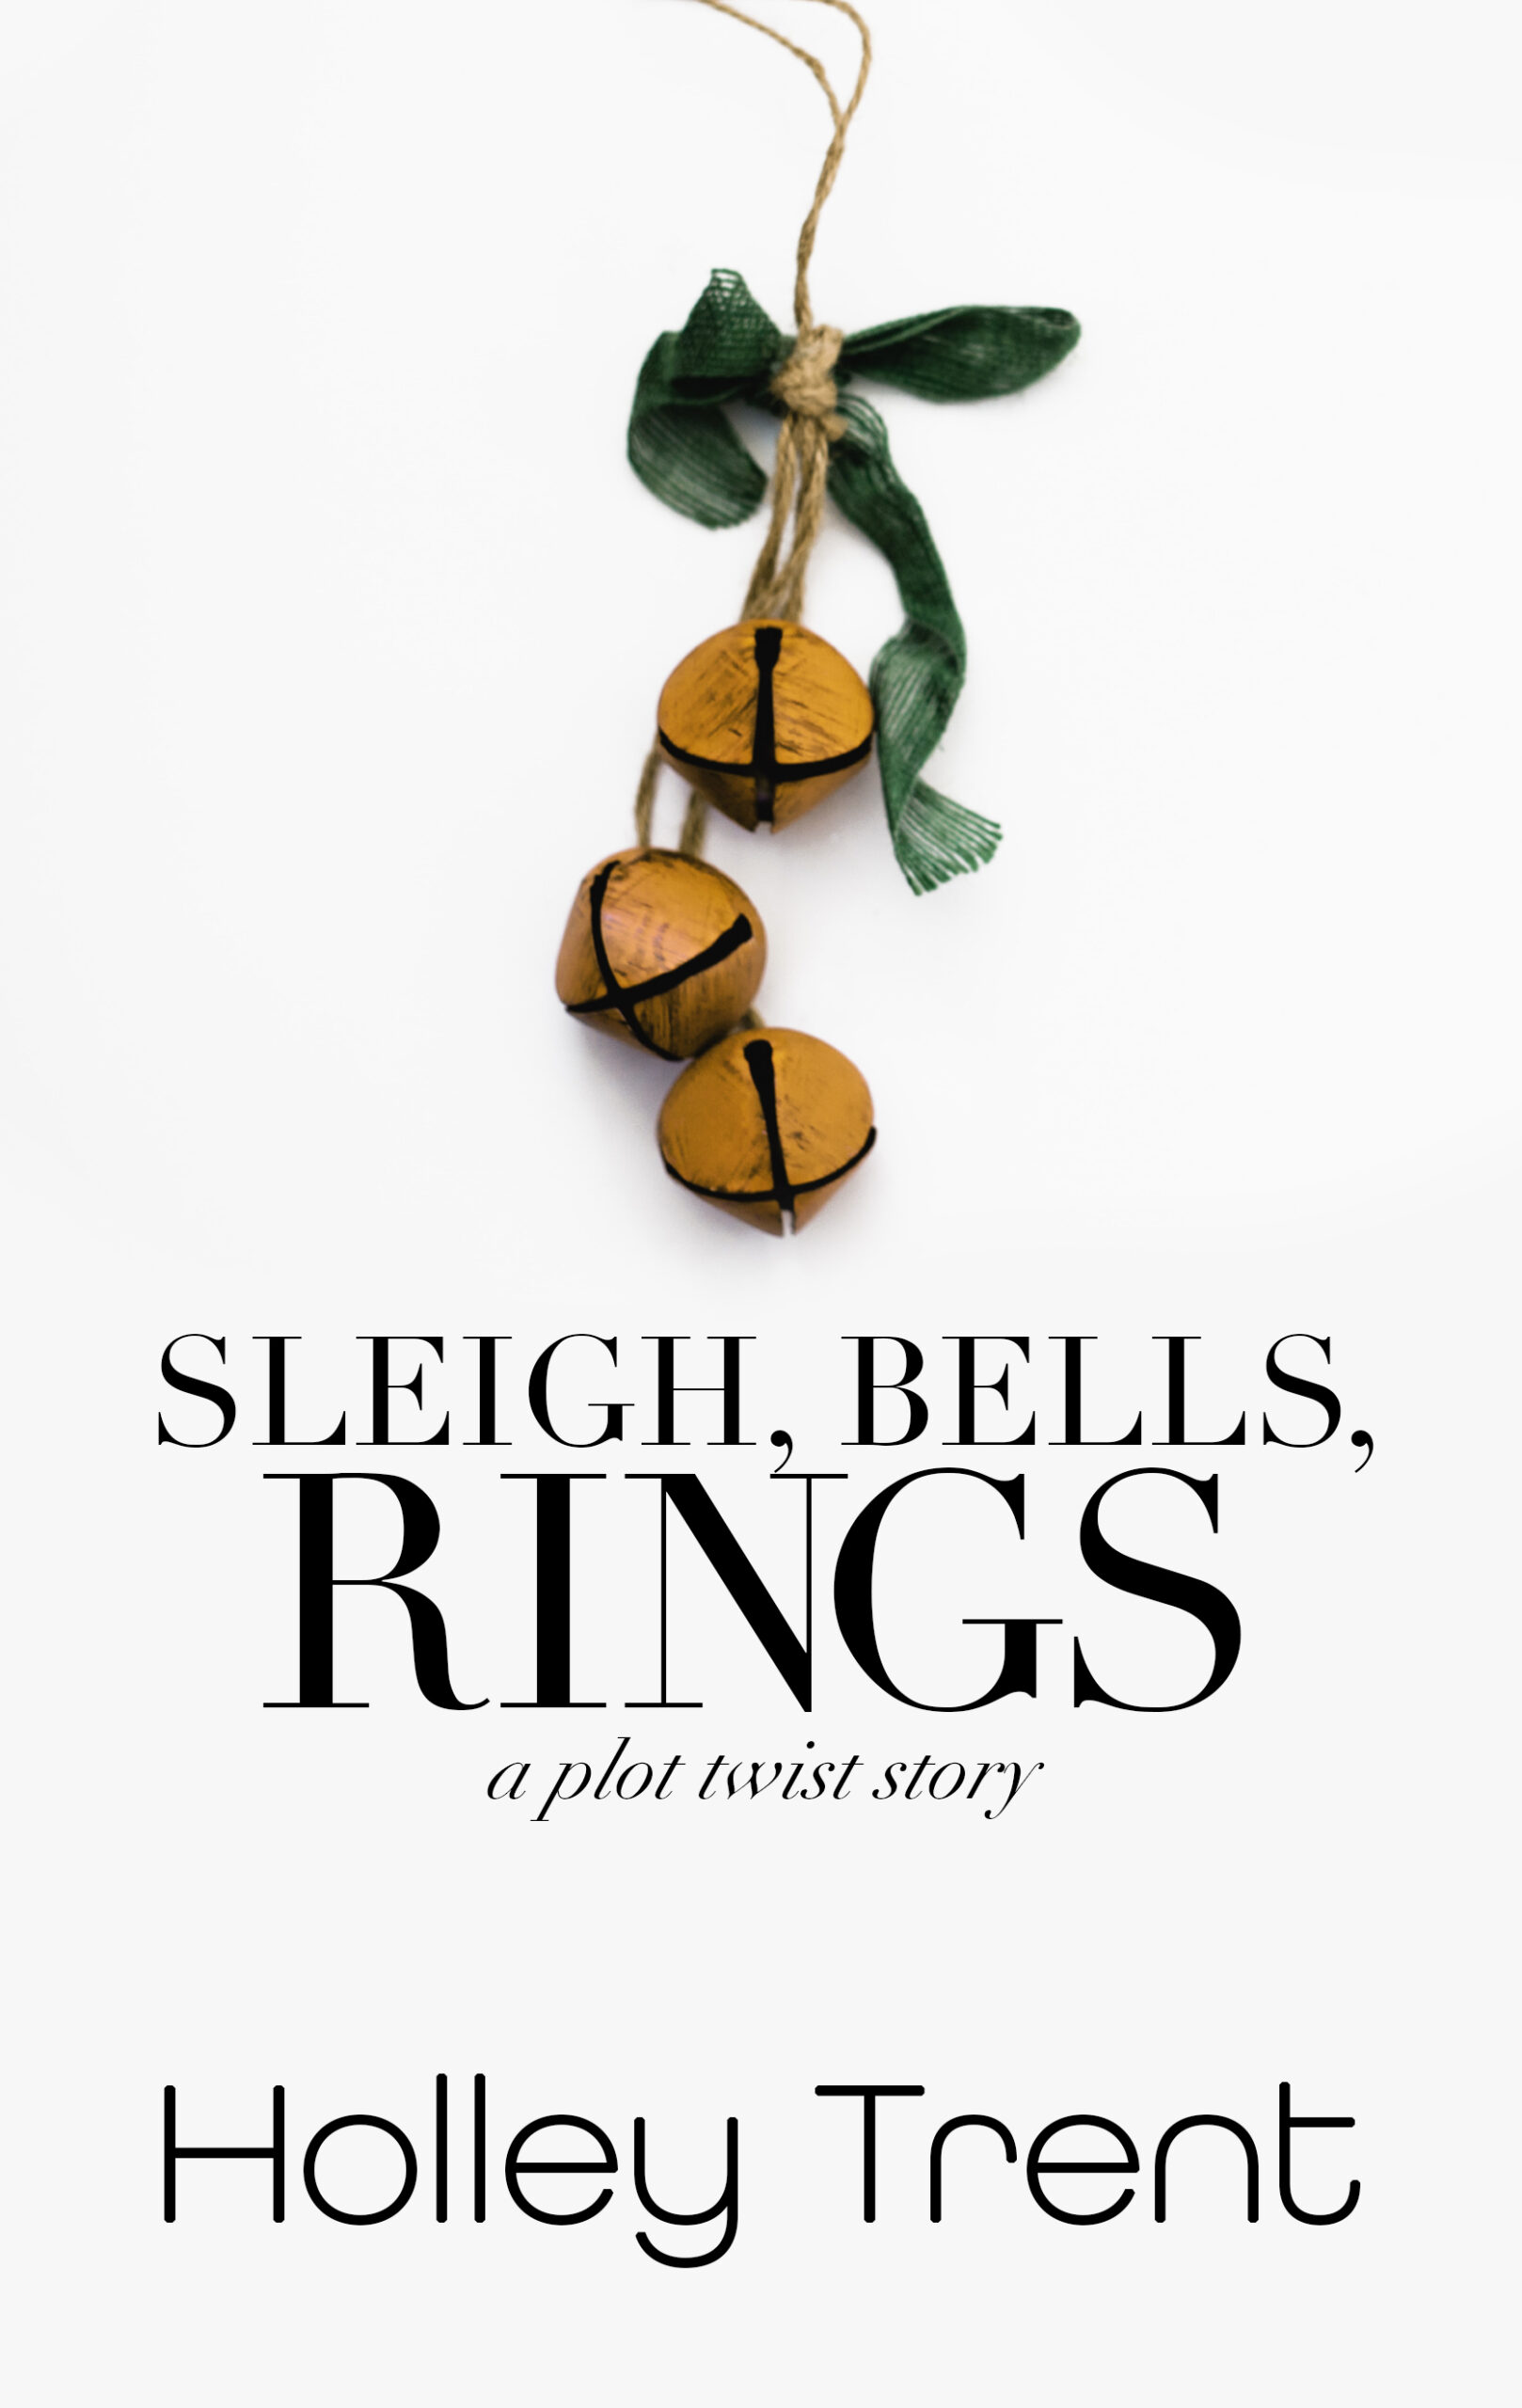 Cover of Sleigh, Bells, Rings by Holley Trent. Has gold Christmas bells tied by a green ribbon over a white background.